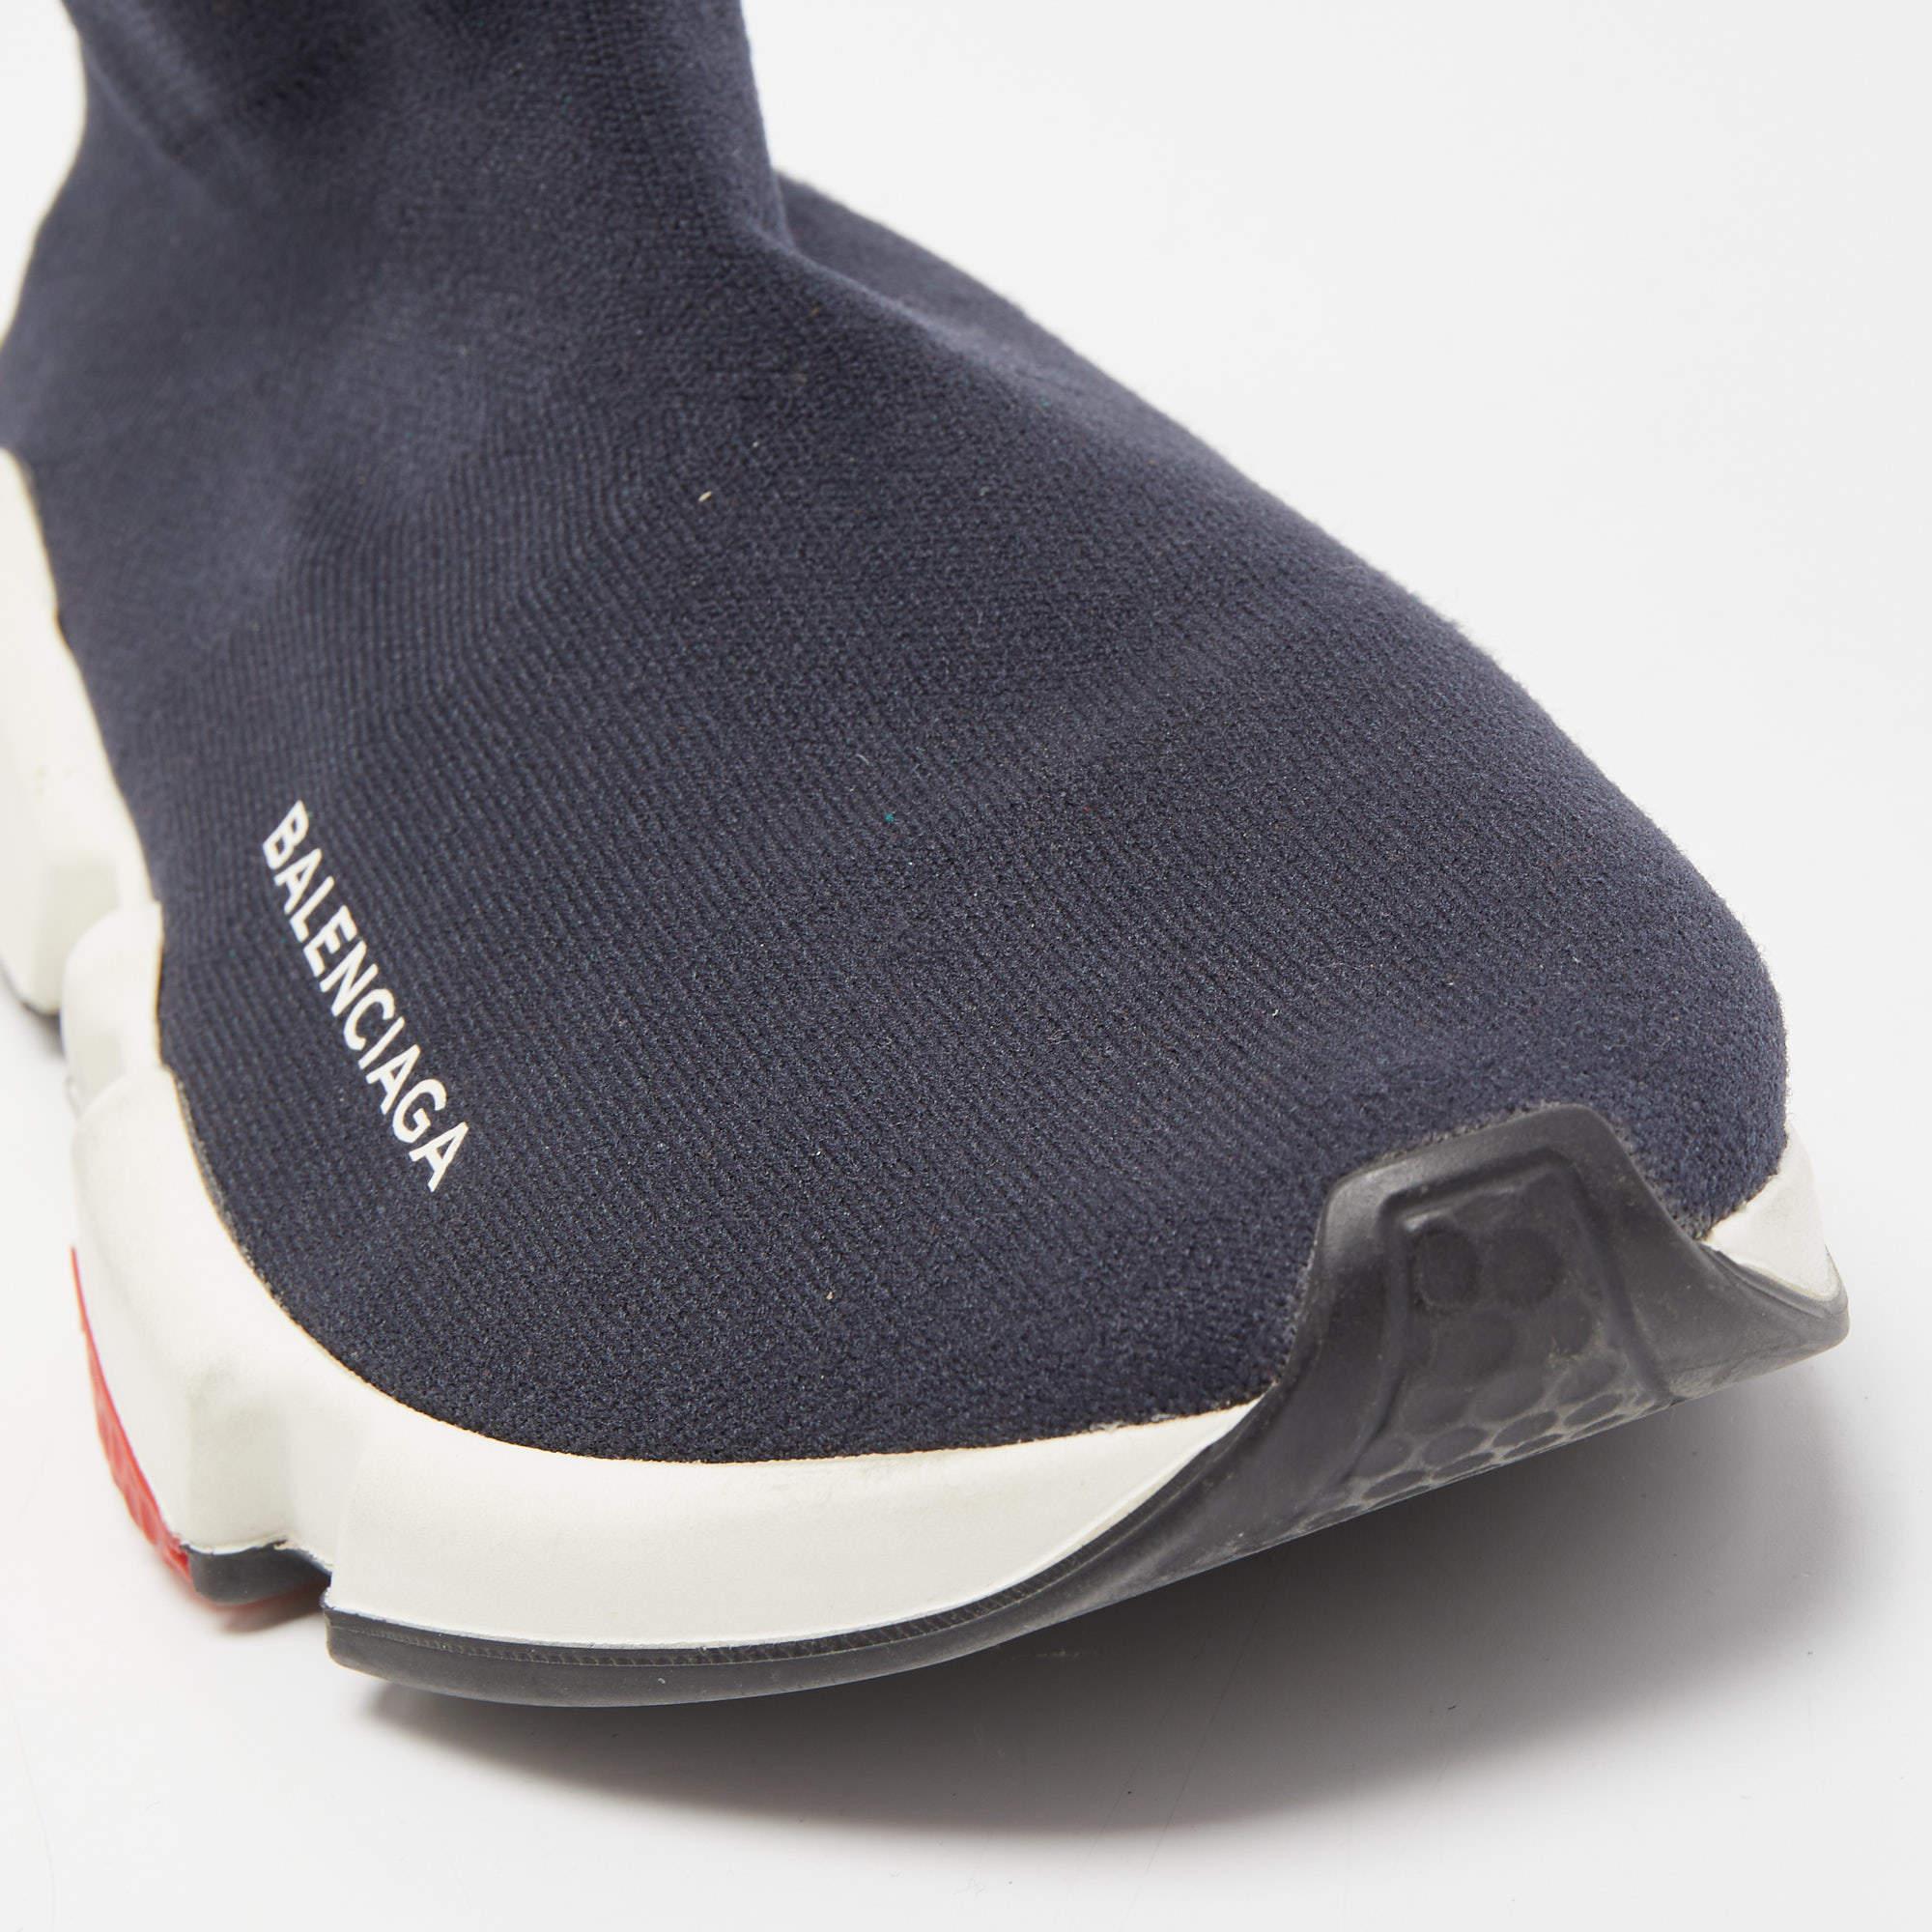 Balenciaga Navy Blue Knit Fabric Speed Trainer Sneakers Size 38 3